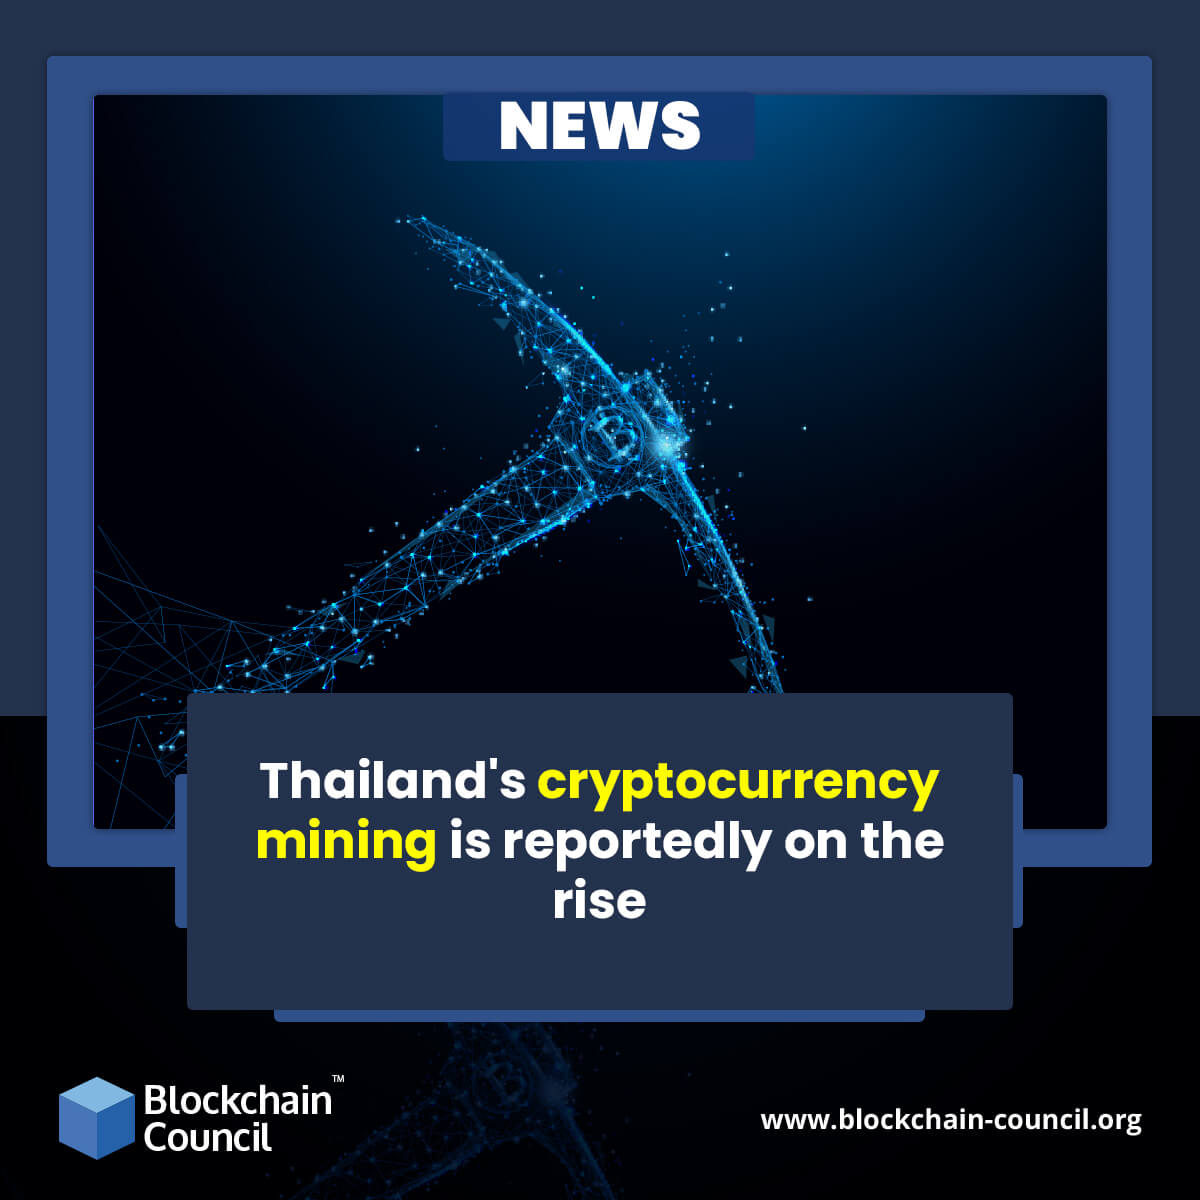 Thailand's cryptocurrency mining is reportedly on the rise